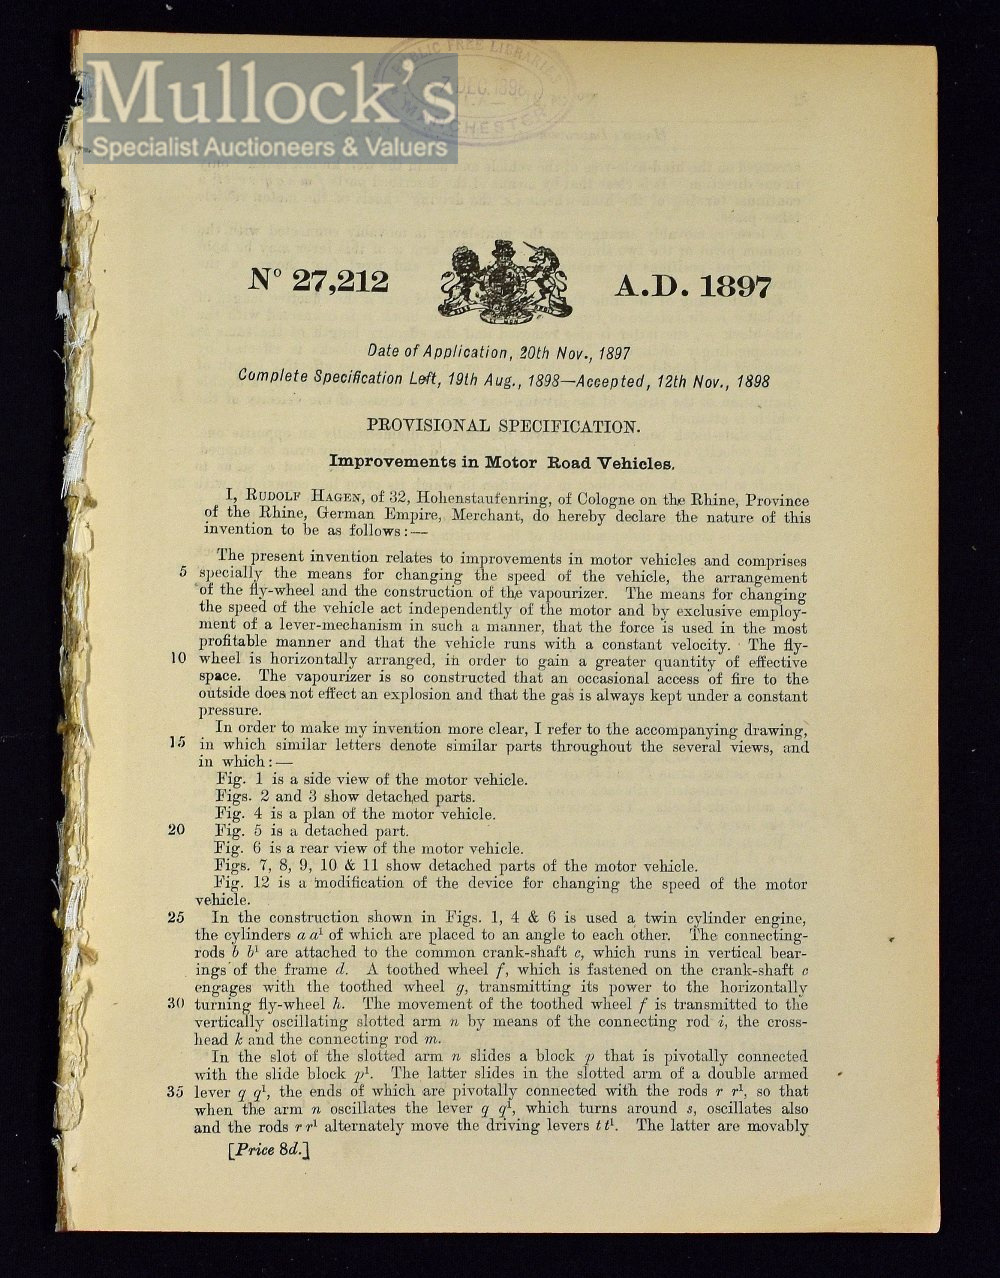 Early Patent For Improvements In The Motor Car 1898 - A 5 page publication by the Patent Office in